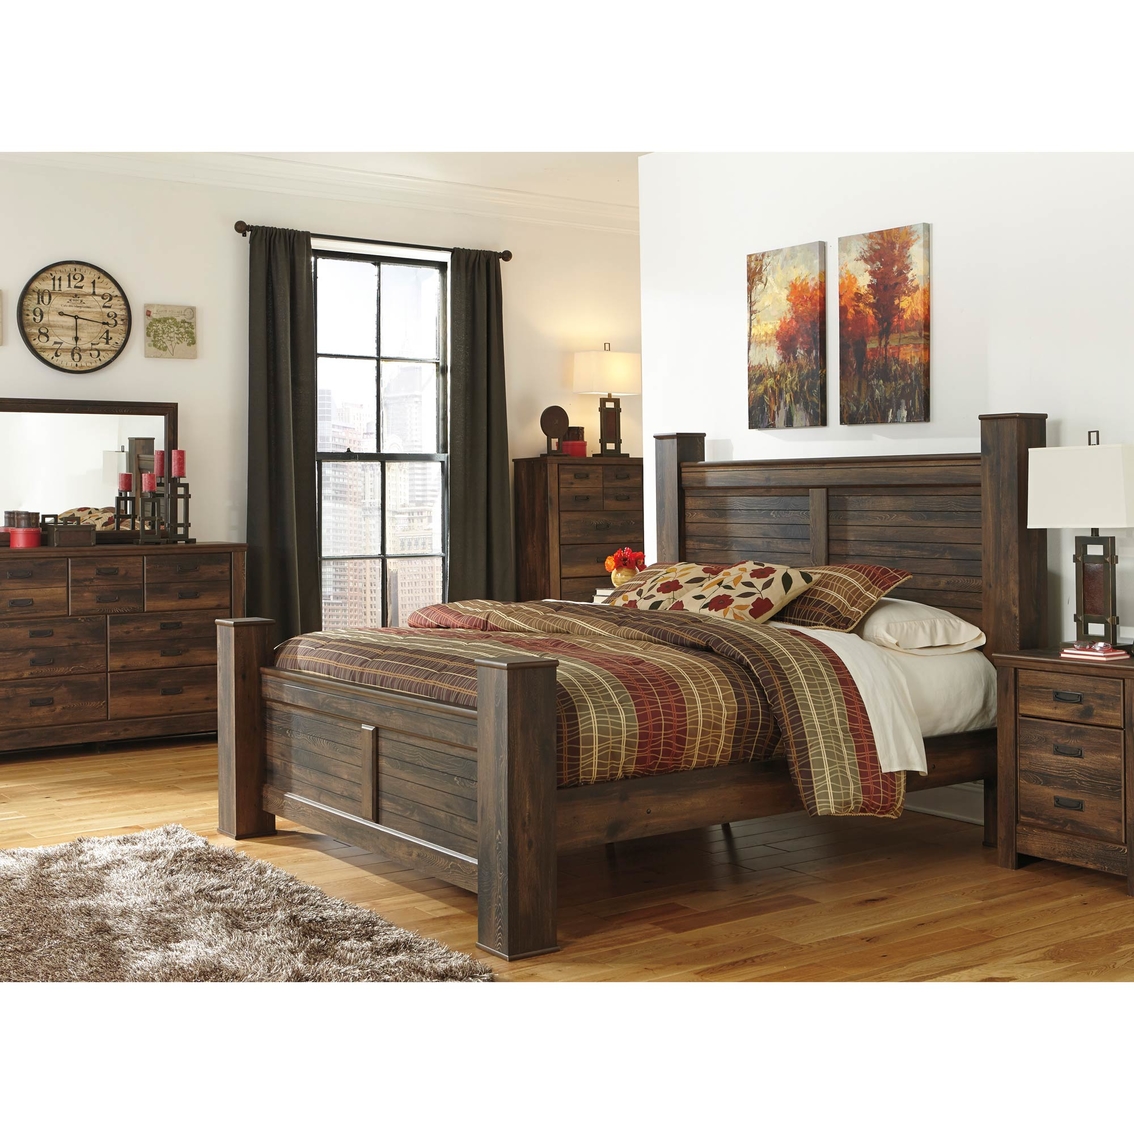 Signature Design by Ashley Quinden Poster Bed - Image 4 of 4